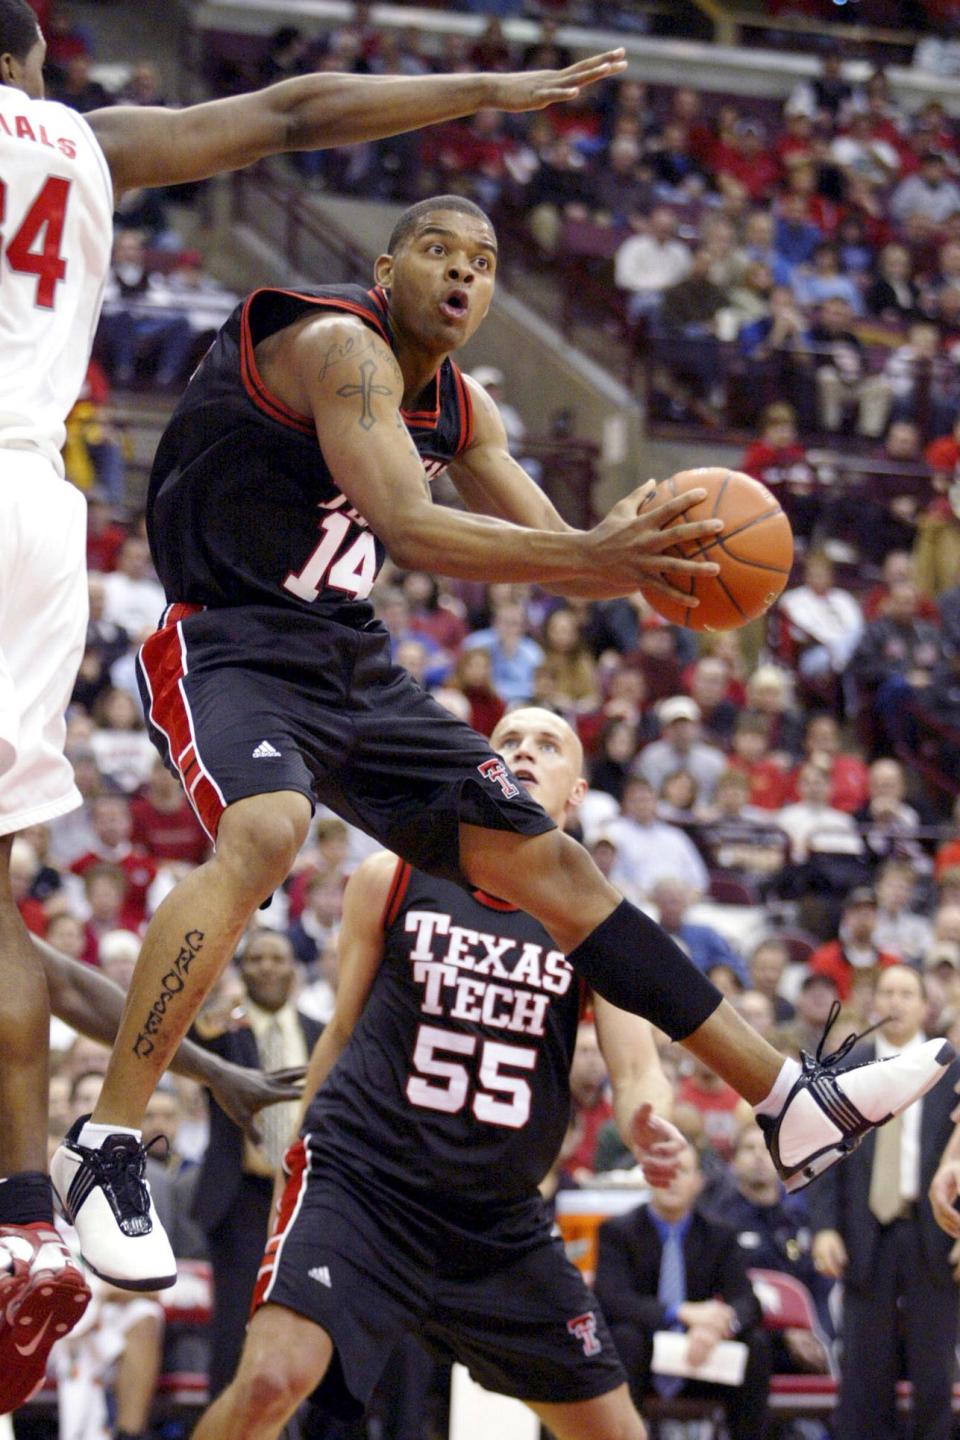 In this Jan 4, 2004, file photo, Texas Tech's Andre Emmett (14) tries to shoot around Ohio State's Terence Dials during he NCAA basketball game at Value City Arena in Columbus, Ohio.